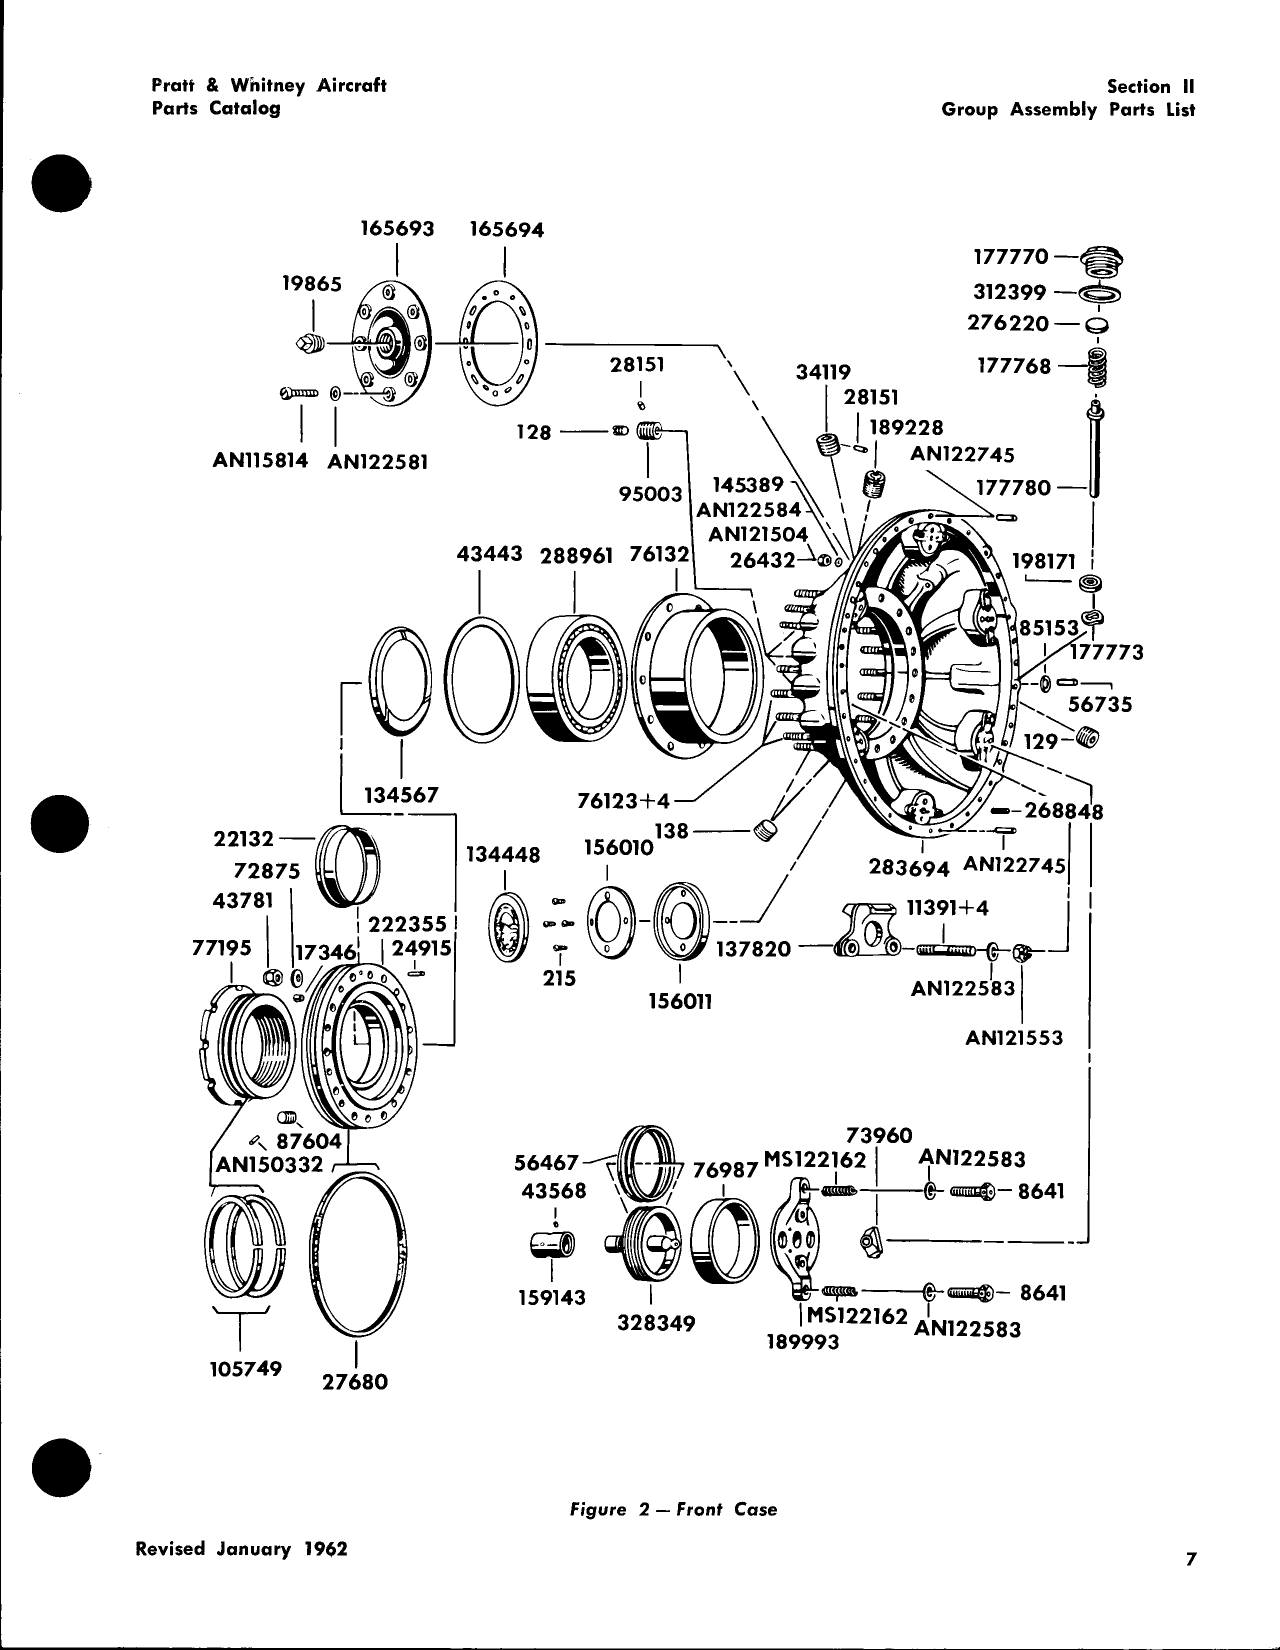 Sample page 10 from AirCorps Library document: R-2800 Double Wasp Parts Catalog